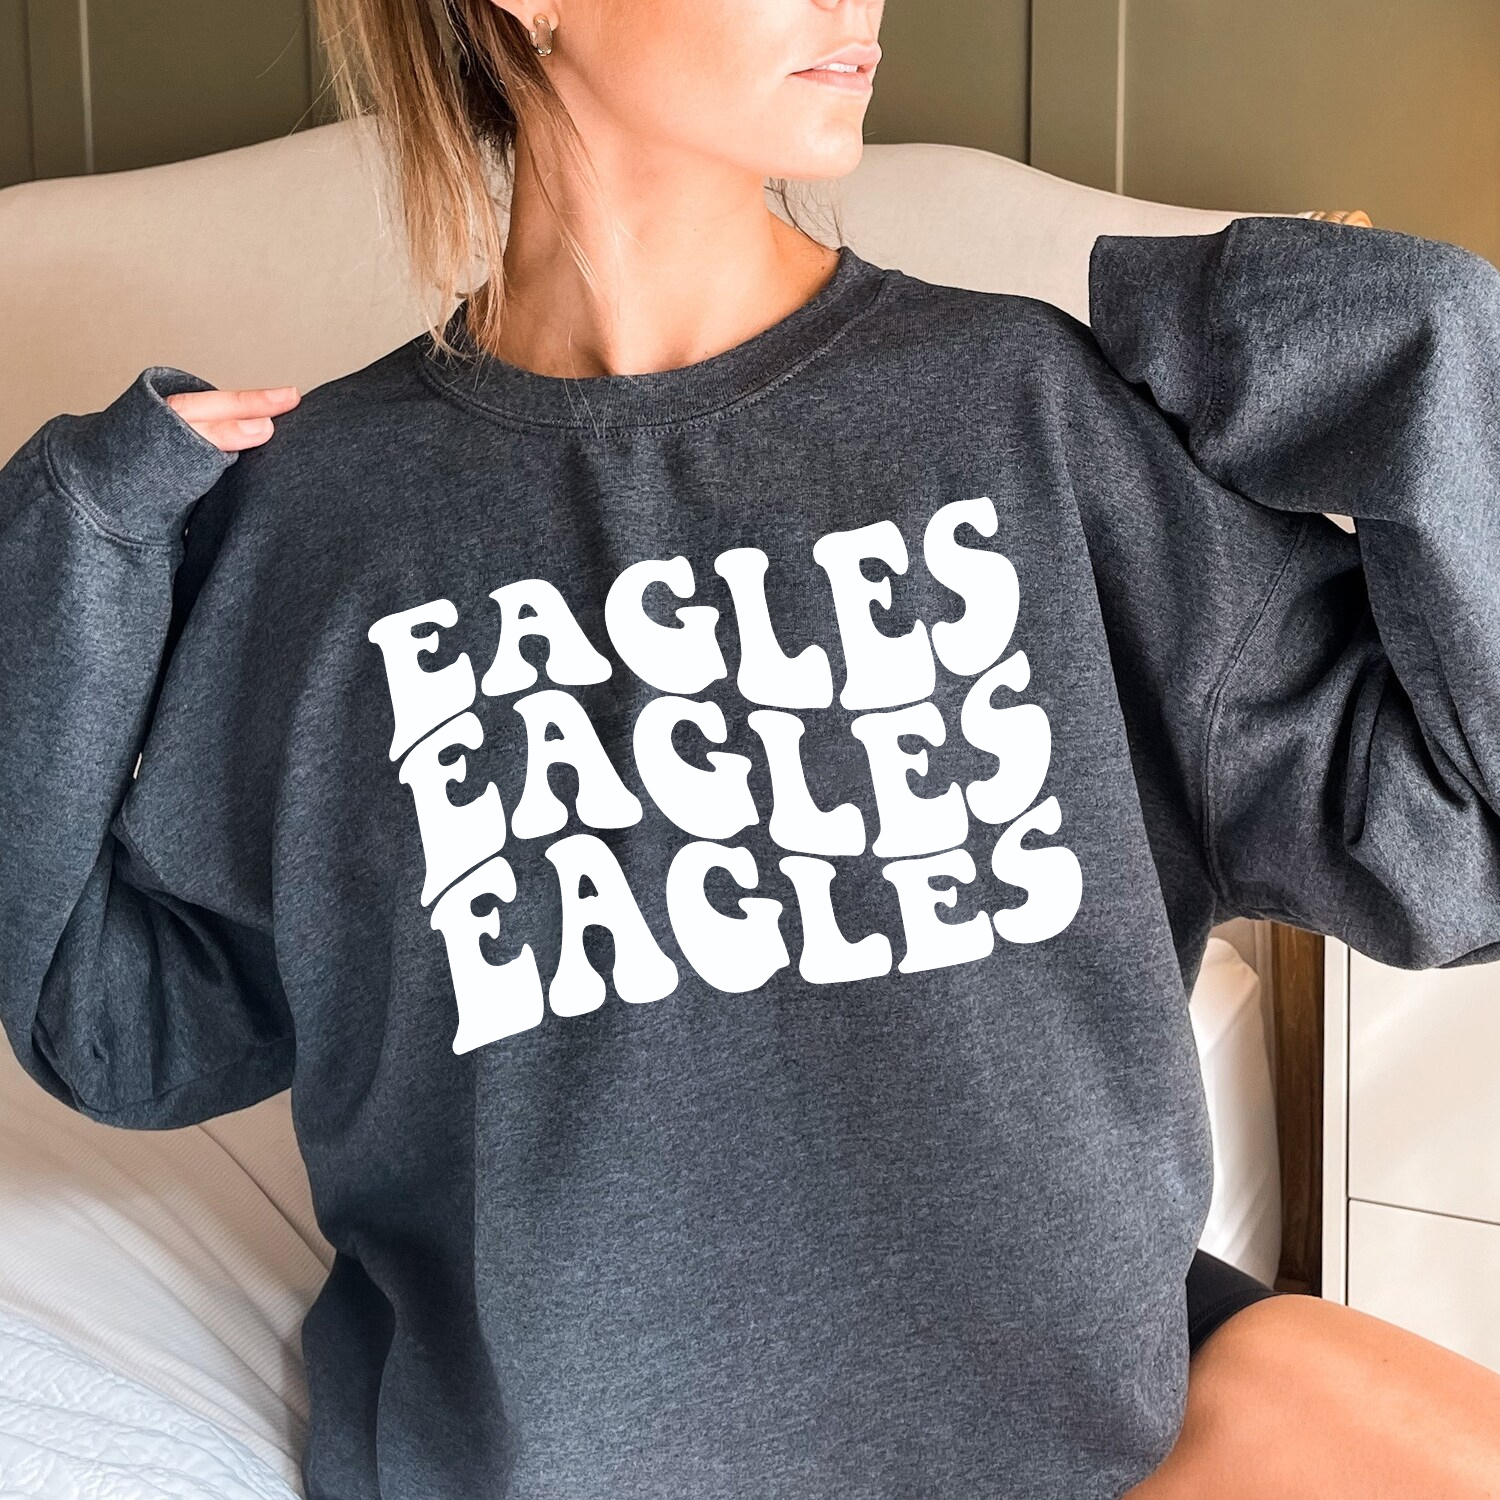 Women's Eagles Shirt, Gifts For Eagles Fans - Happy Place for